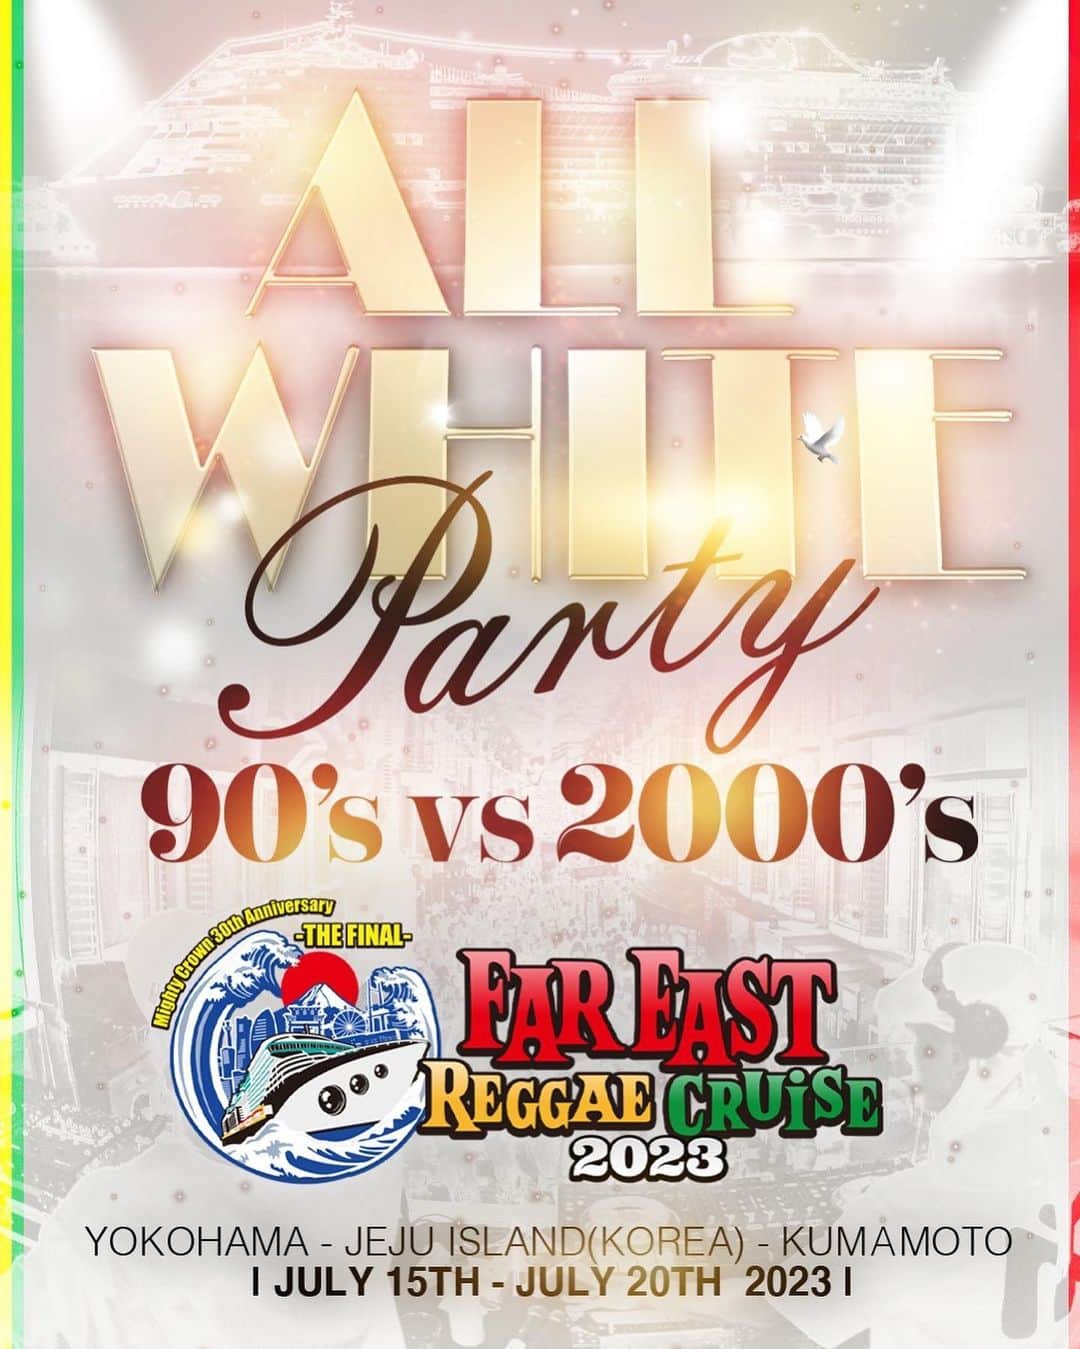 MIGHTY CROWNのインスタグラム：「All white party on the @fareastreggaecruise gonna be epic 🔥🔥🔥 with di hottest Djs & selecta!!!! This ship big!!! To ratid  船上でのオールホワイト パーティーは 忘れられない日になるでしょう」